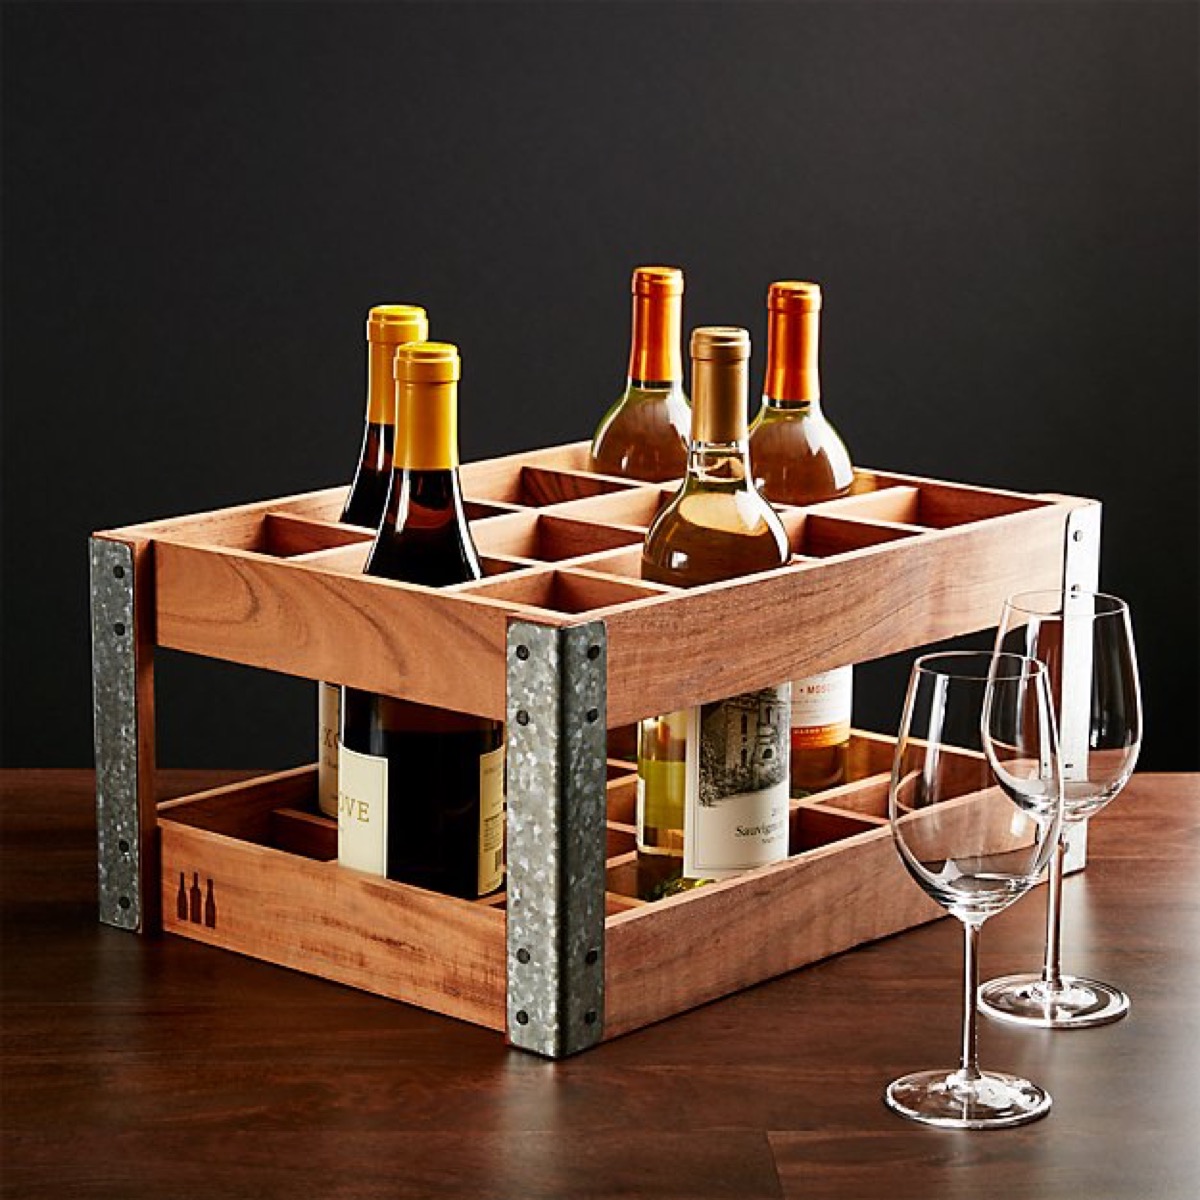 Crate and Barrel Wine Rack Mother's Day Gifts